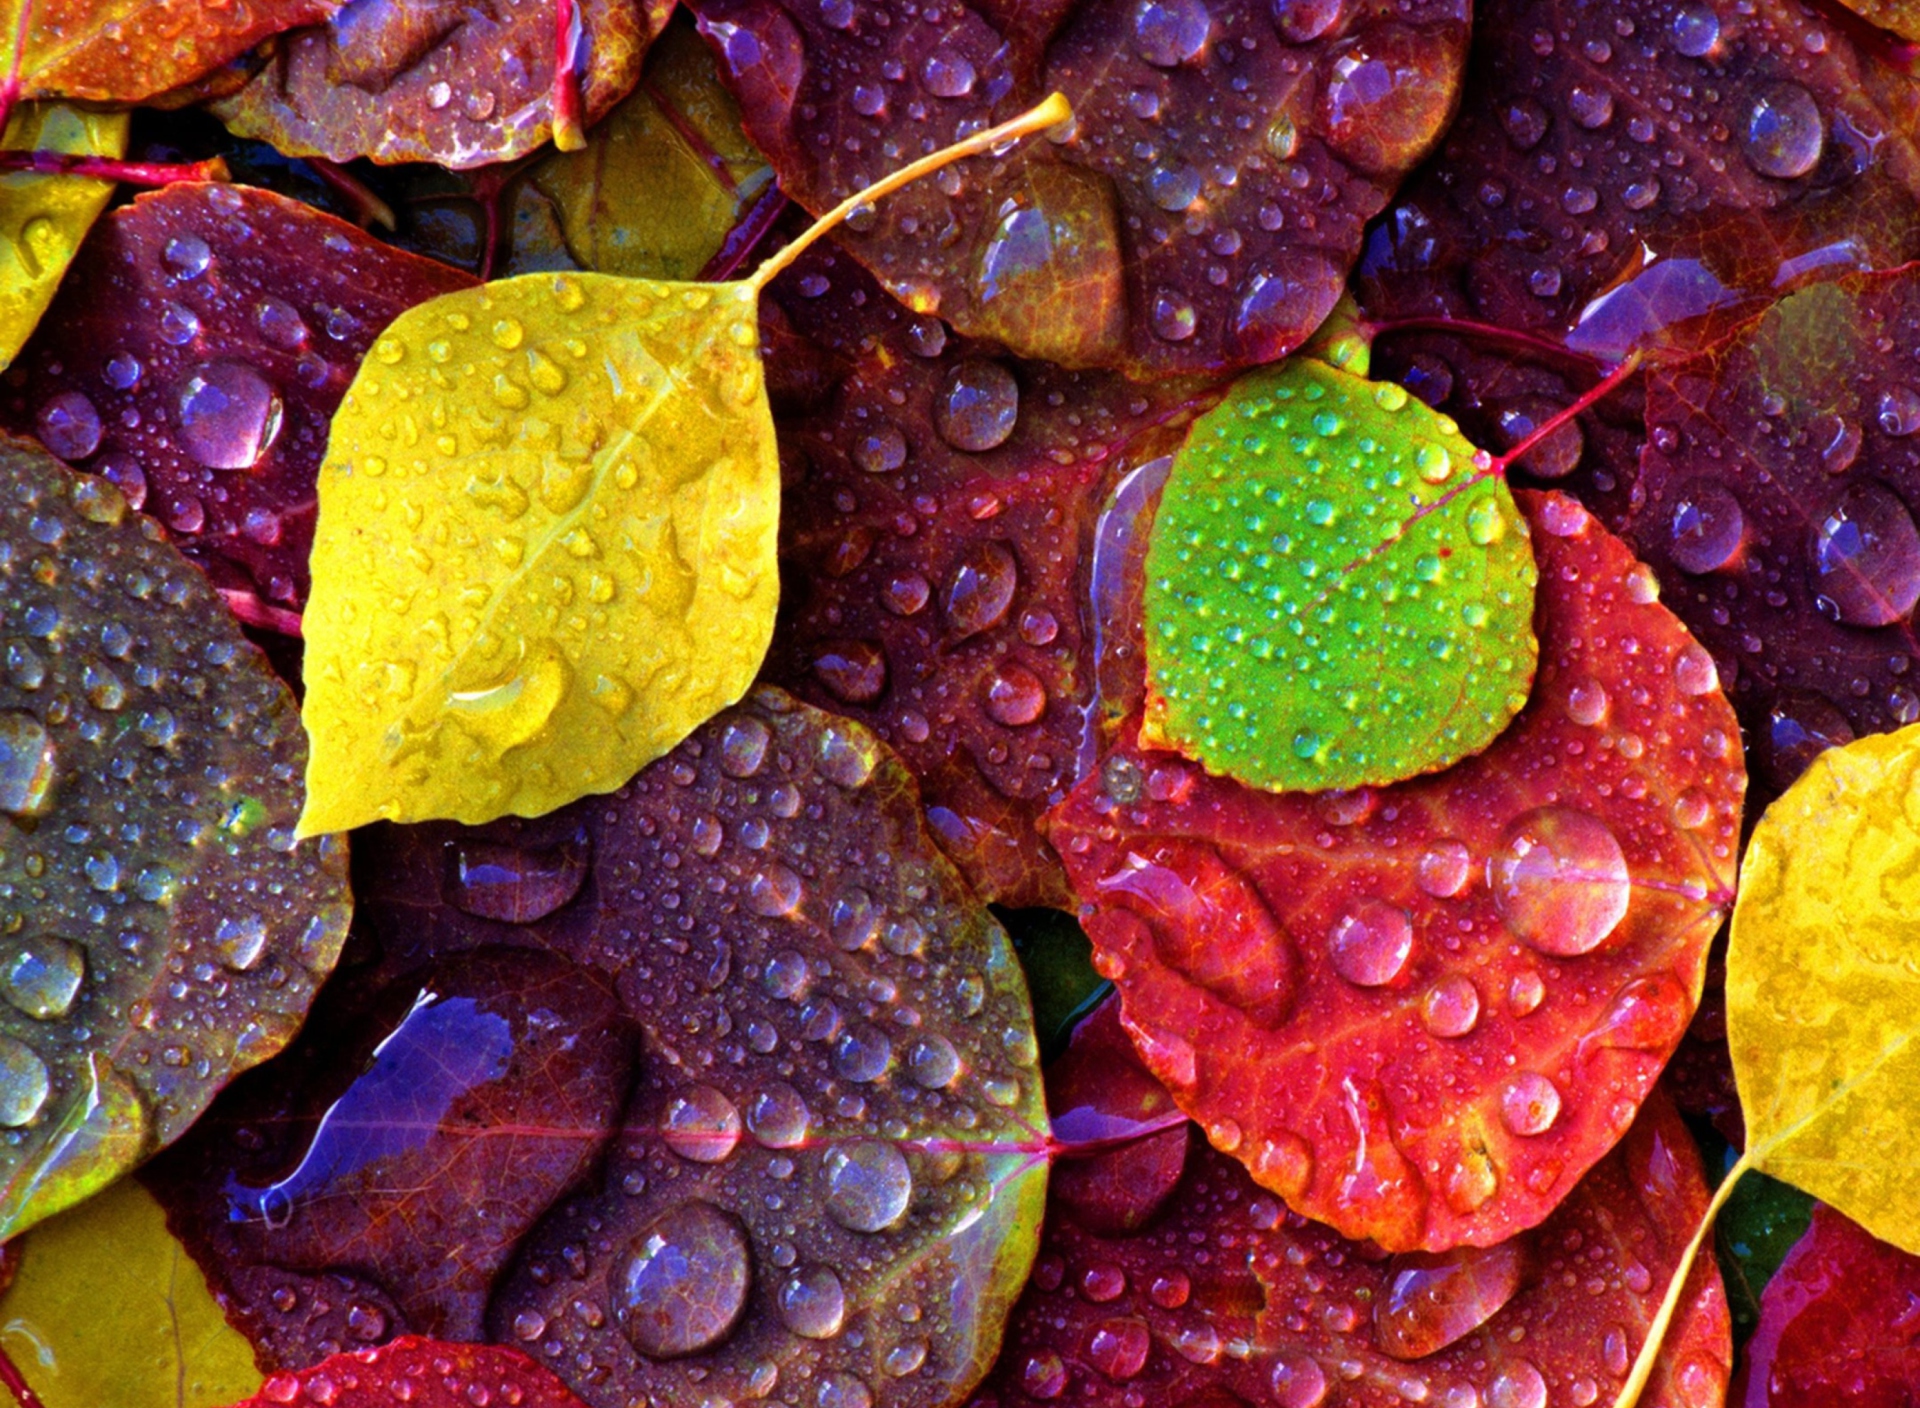 Colorful Leaves wallpaper 1920x1408